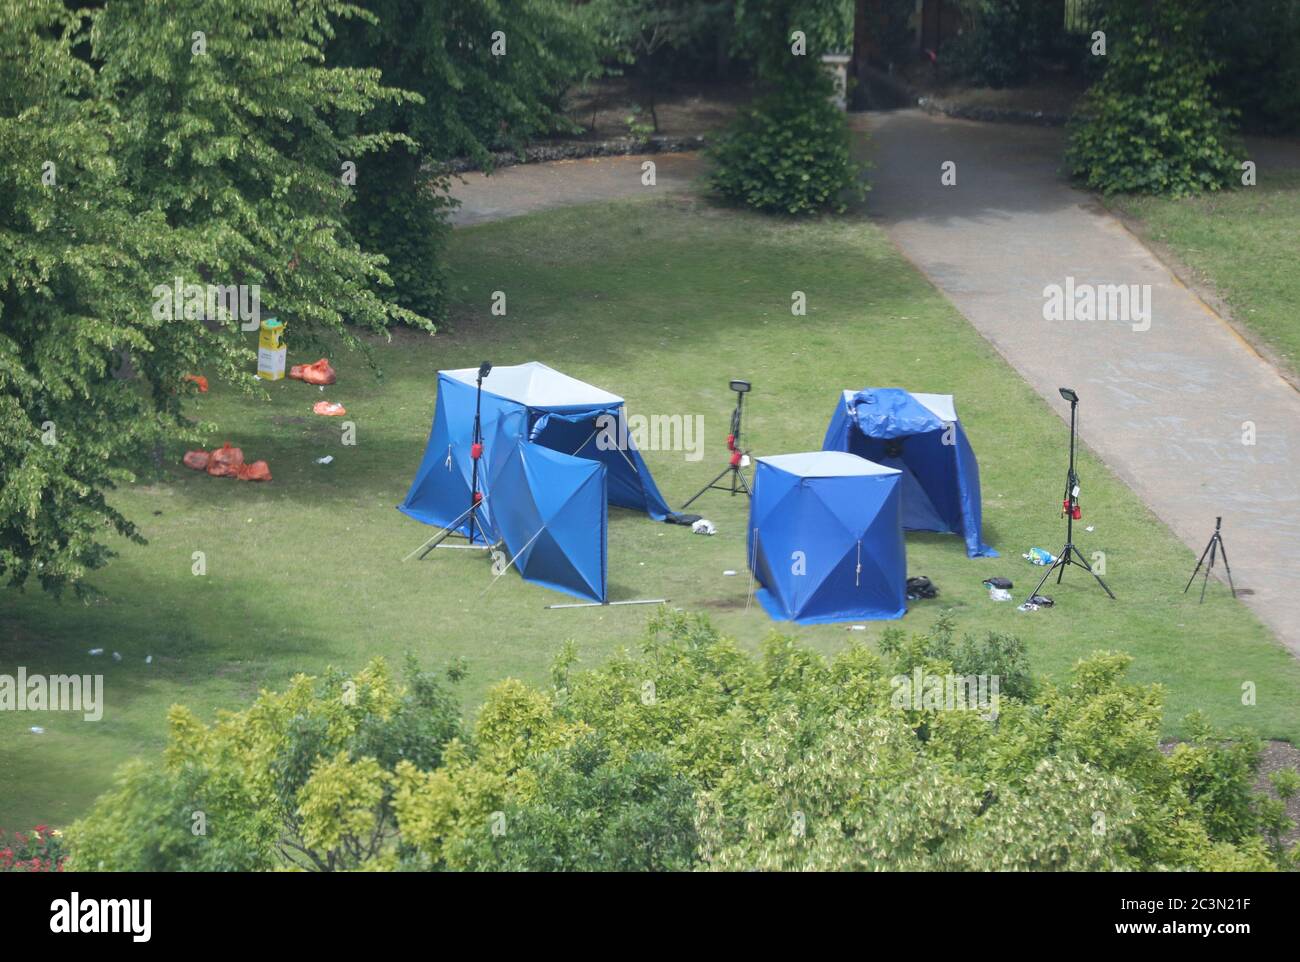 Police tents in Forbury Gardens in Reading town centre at the scene of a multiple stabbing attack which took place at around 7pm on Saturday leaving three people dead and another three seriously injured. Stock Photo